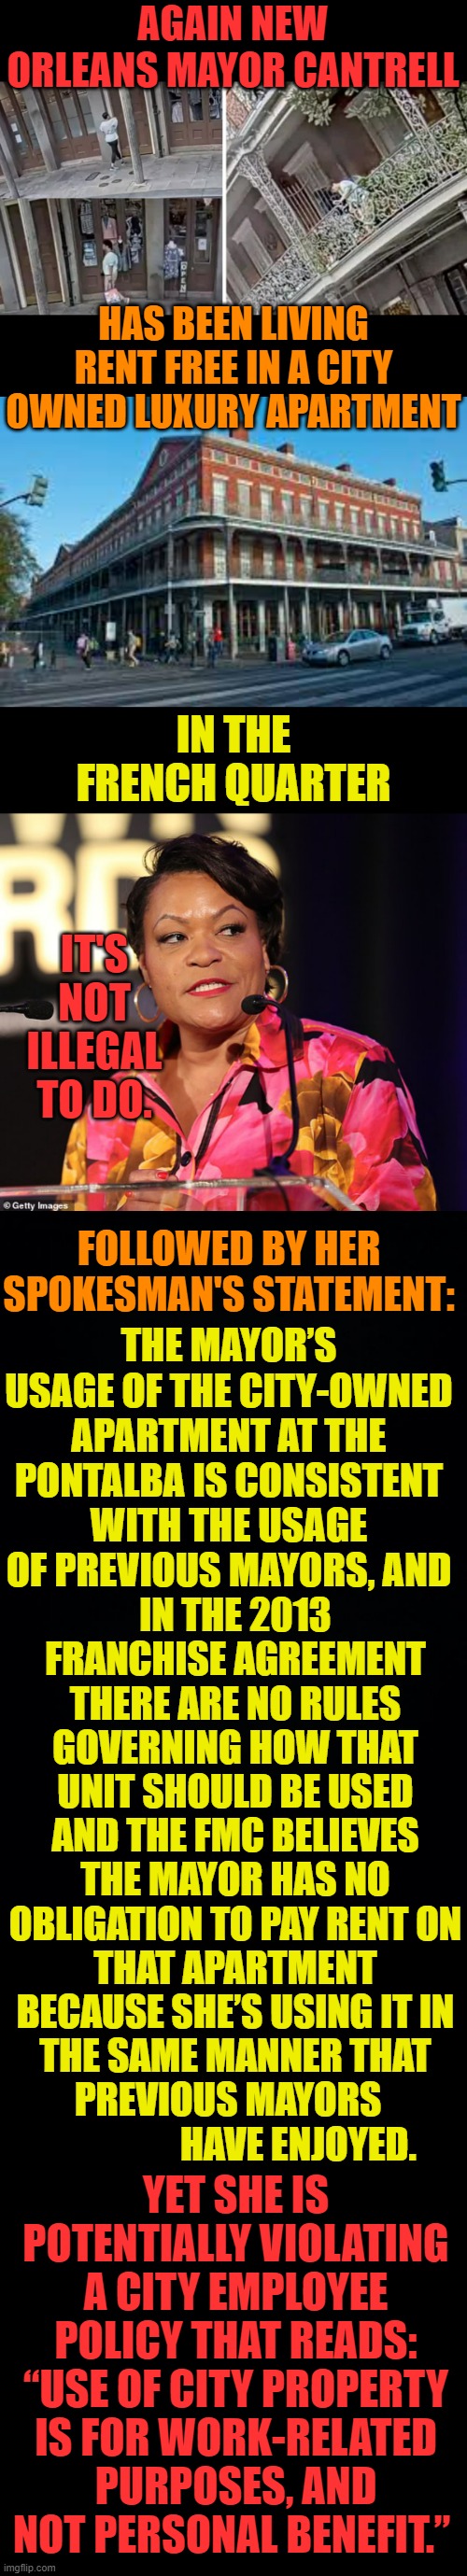 More Financial Fleecing Of The Public | AGAIN NEW ORLEANS MAYOR CANTRELL; HAS BEEN LIVING RENT FREE IN A CITY OWNED LUXURY APARTMENT; IN THE FRENCH QUARTER; IT'S NOT ILLEGAL TO DO. FOLLOWED BY HER SPOKESMAN'S STATEMENT:; THE MAYOR’S USAGE OF THE CITY-OWNED APARTMENT AT THE PONTALBA IS CONSISTENT WITH THE USAGE OF PREVIOUS MAYORS, AND; IN THE 2013 FRANCHISE AGREEMENT THERE ARE NO RULES GOVERNING HOW THAT UNIT SHOULD BE USED AND THE FMC BELIEVES THE MAYOR HAS NO OBLIGATION TO PAY RENT ON THAT APARTMENT BECAUSE SHE’S USING IT IN THE SAME MANNER THAT PREVIOUS MAYORS                    HAVE ENJOYED. YET SHE IS POTENTIALLY VIOLATING A CITY EMPLOYEE POLICY THAT READS: “USE OF CITY PROPERTY IS FOR WORK-RELATED PURPOSES, AND NOT PERSONAL BENEFIT.” | image tagged in memes,politics,new orleans,mayor,rent,free | made w/ Imgflip meme maker